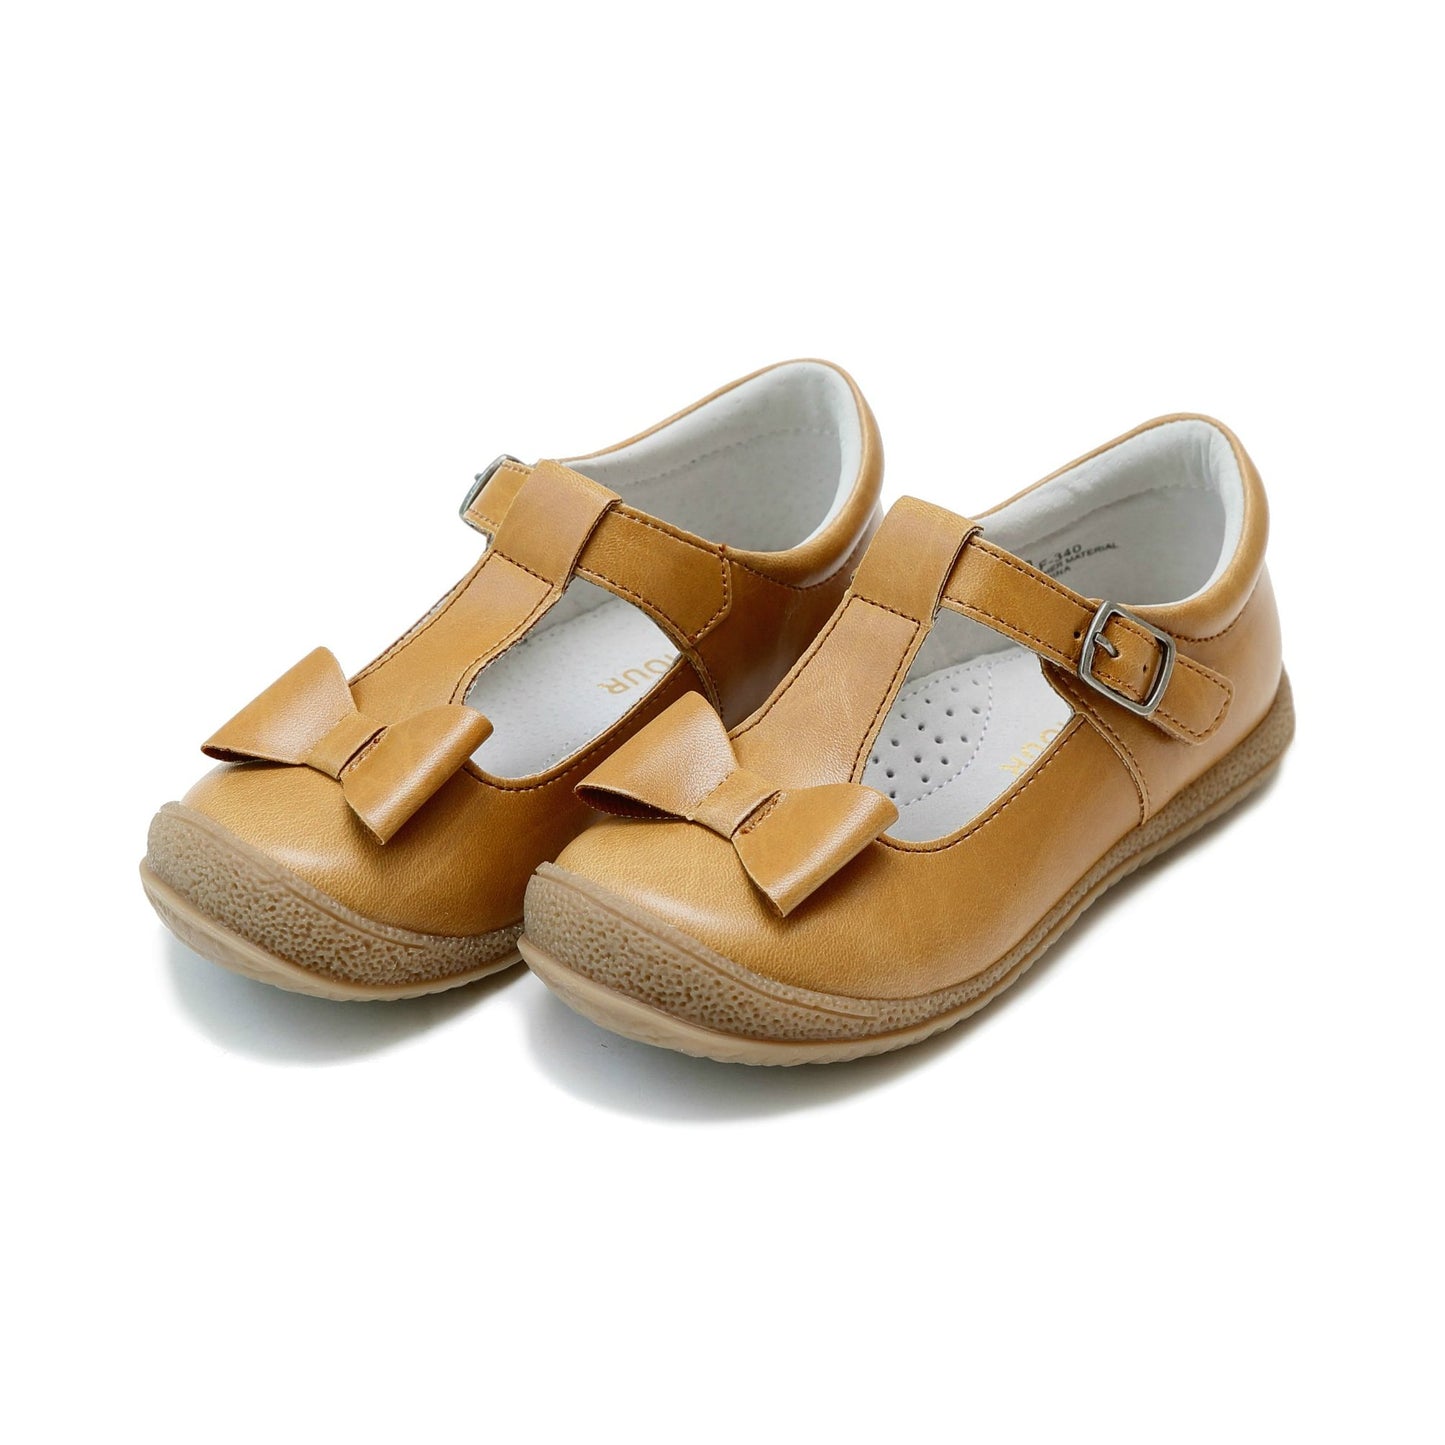 L'Amour Emma T-Strap Bow Mary Jane - Mustard